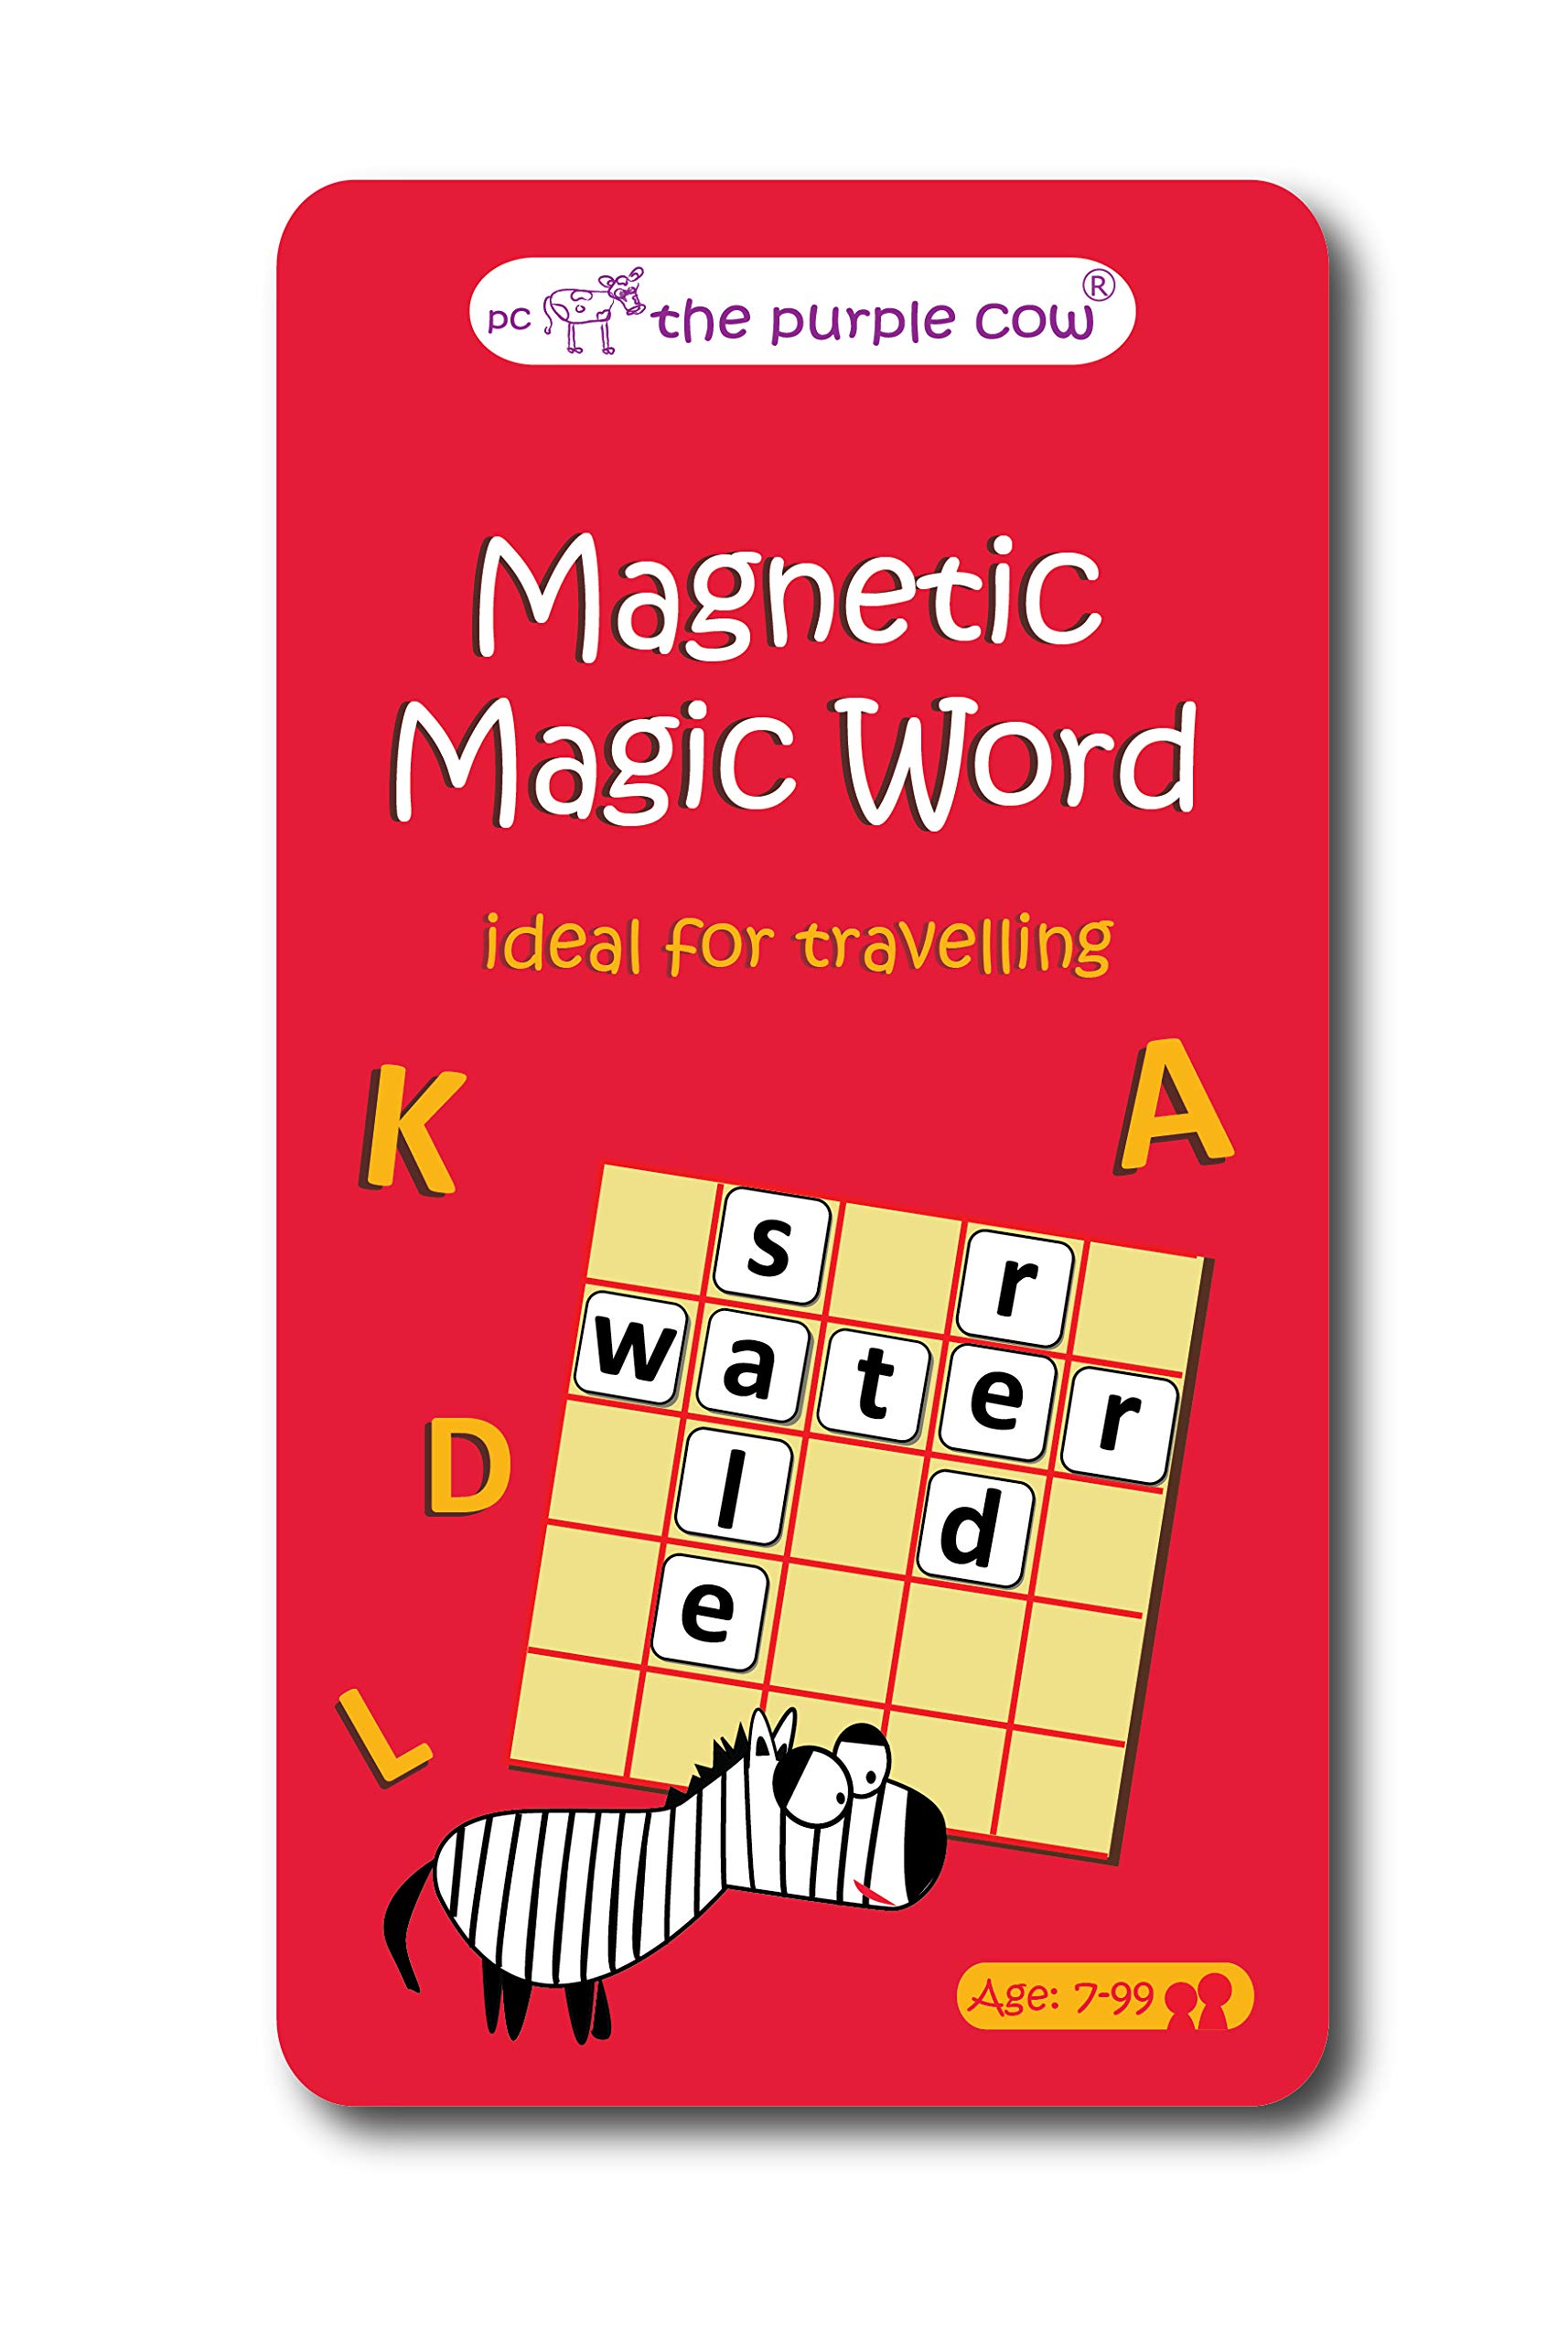 Magnetic Travel Magic Word Game - Car Games , Airplane Games and Quiet Games